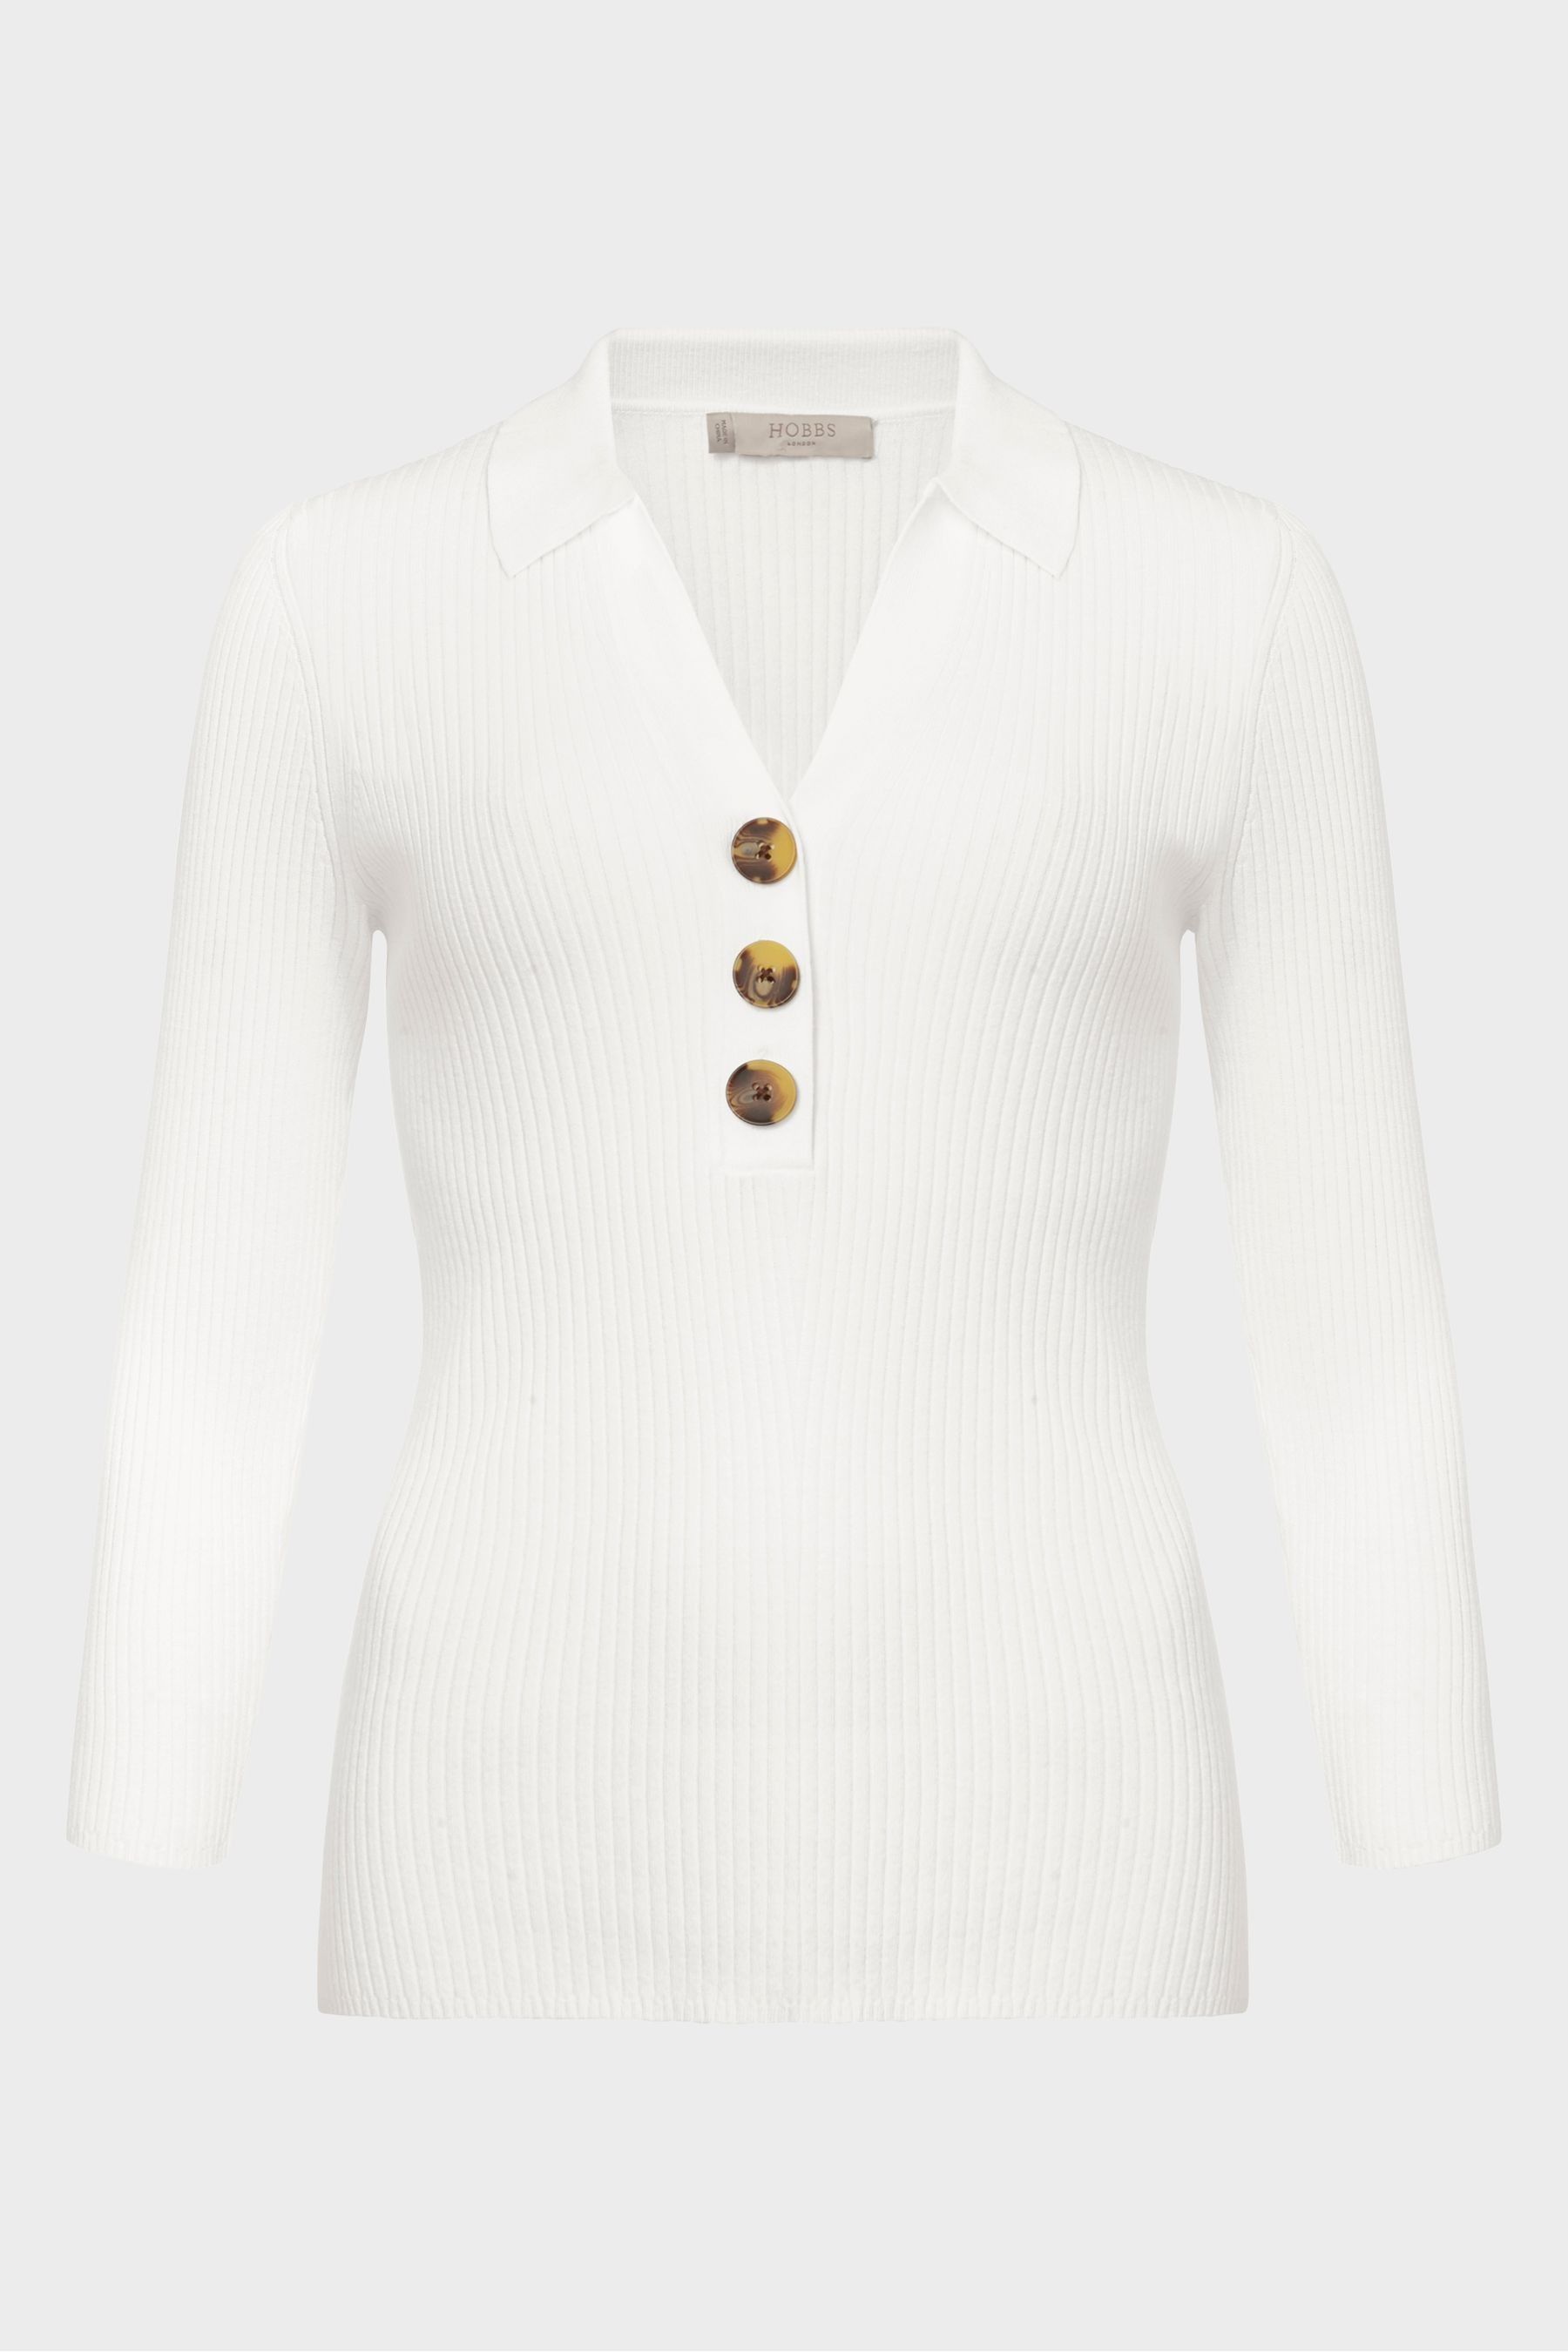 Buy Hobbs Cream Edie Knitted Shirt from the Next UK online shop